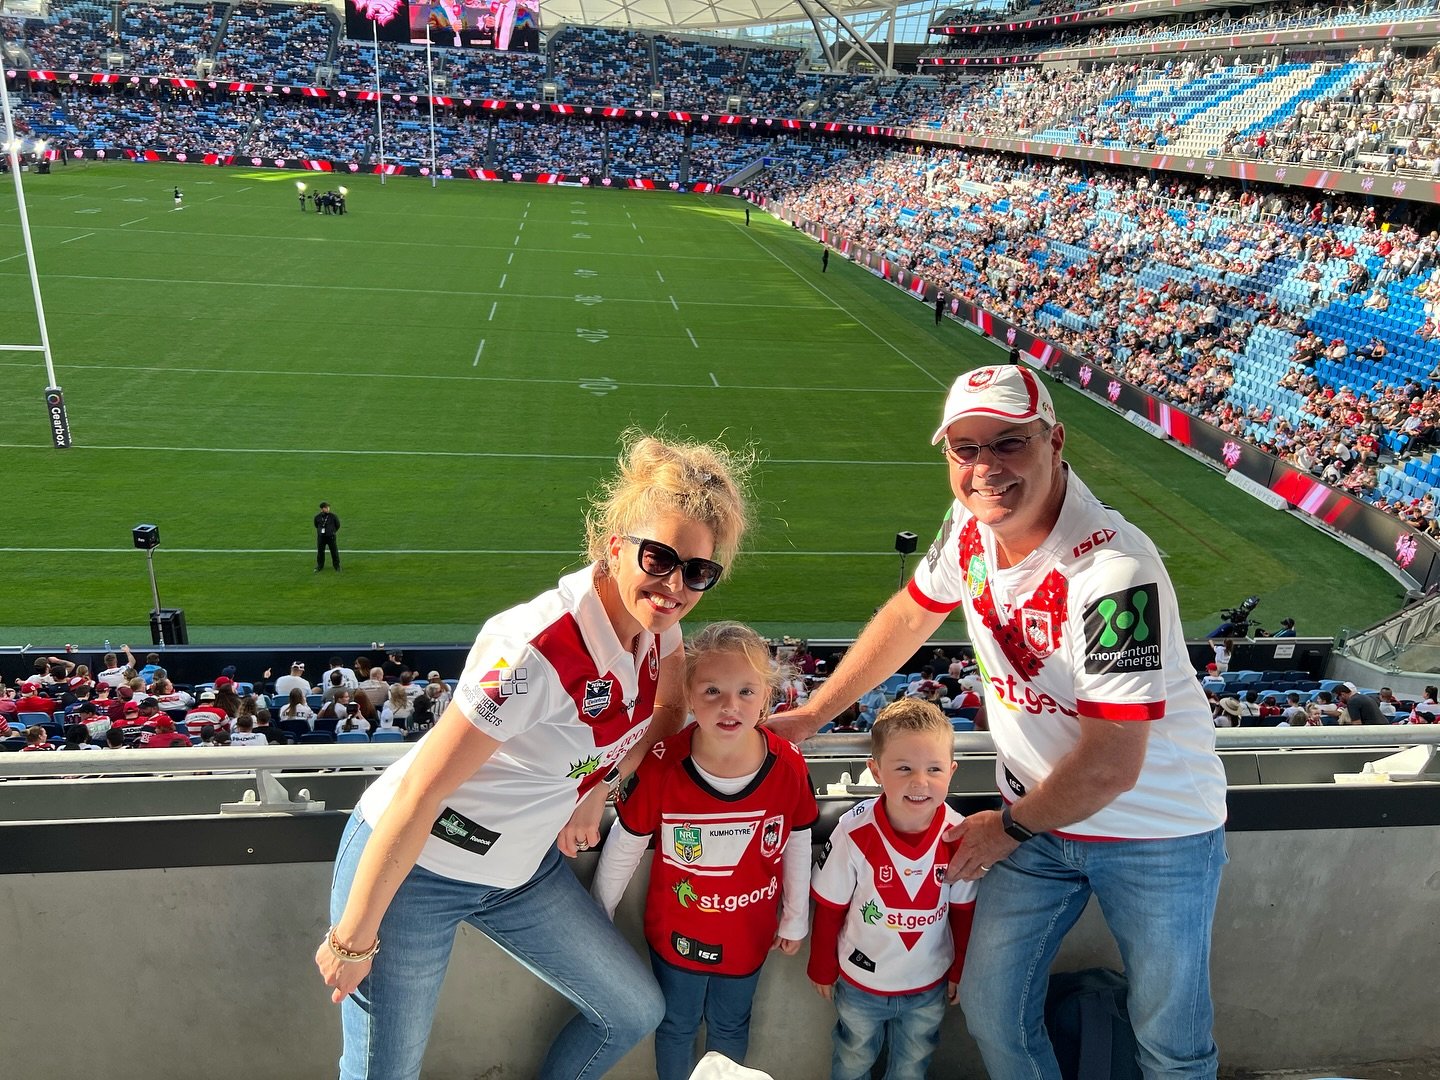 Let&rsquo;s go #dragons 🐉
.
.
.
.
@nrl_dragons #anzacday #dragonsvsroosters #nrl #footy #stgeorge #rugbyleague